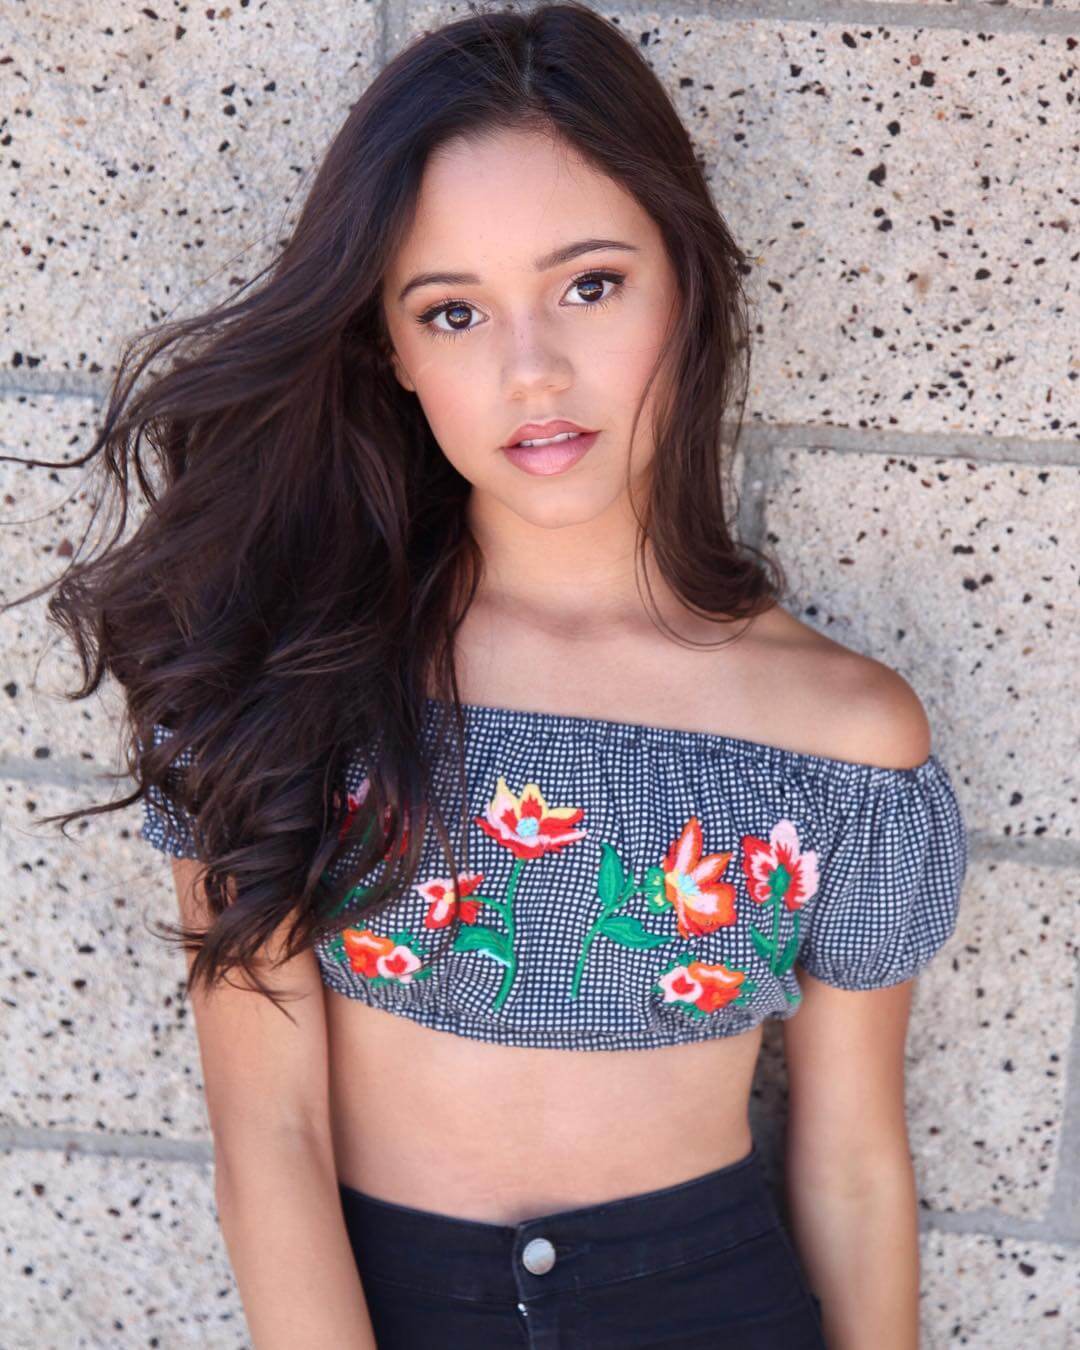 Hot Pictures Of Jenna Ortega Are Here To Take Your Breath Away